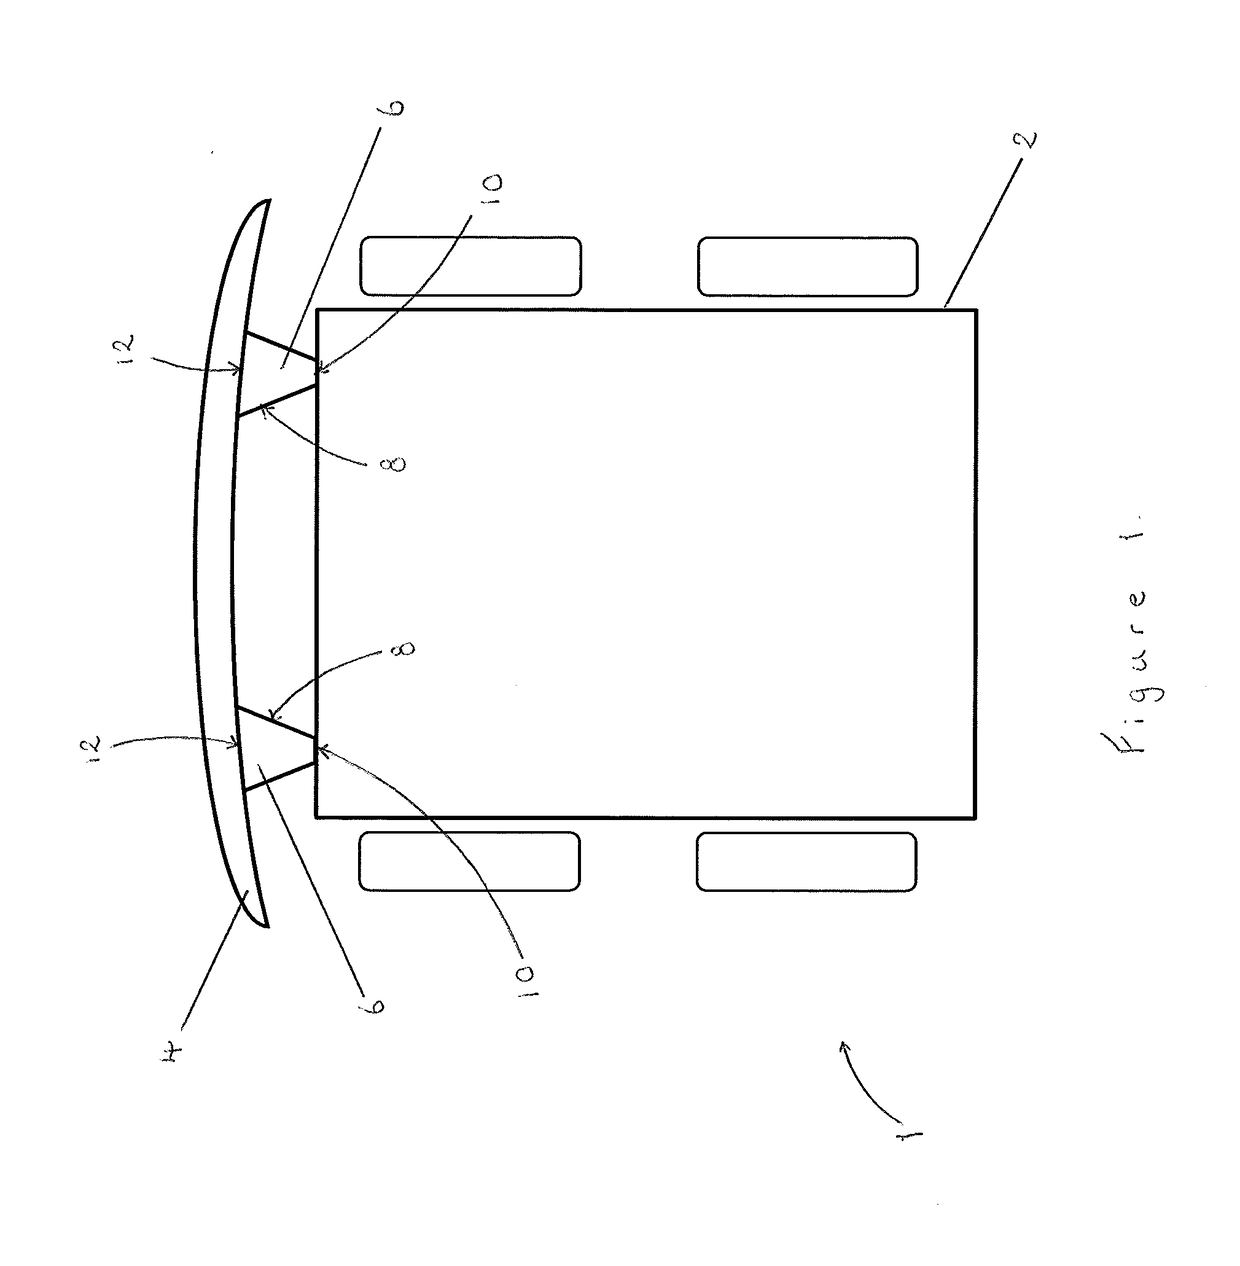 An impact energy absorbing device for a vehicle